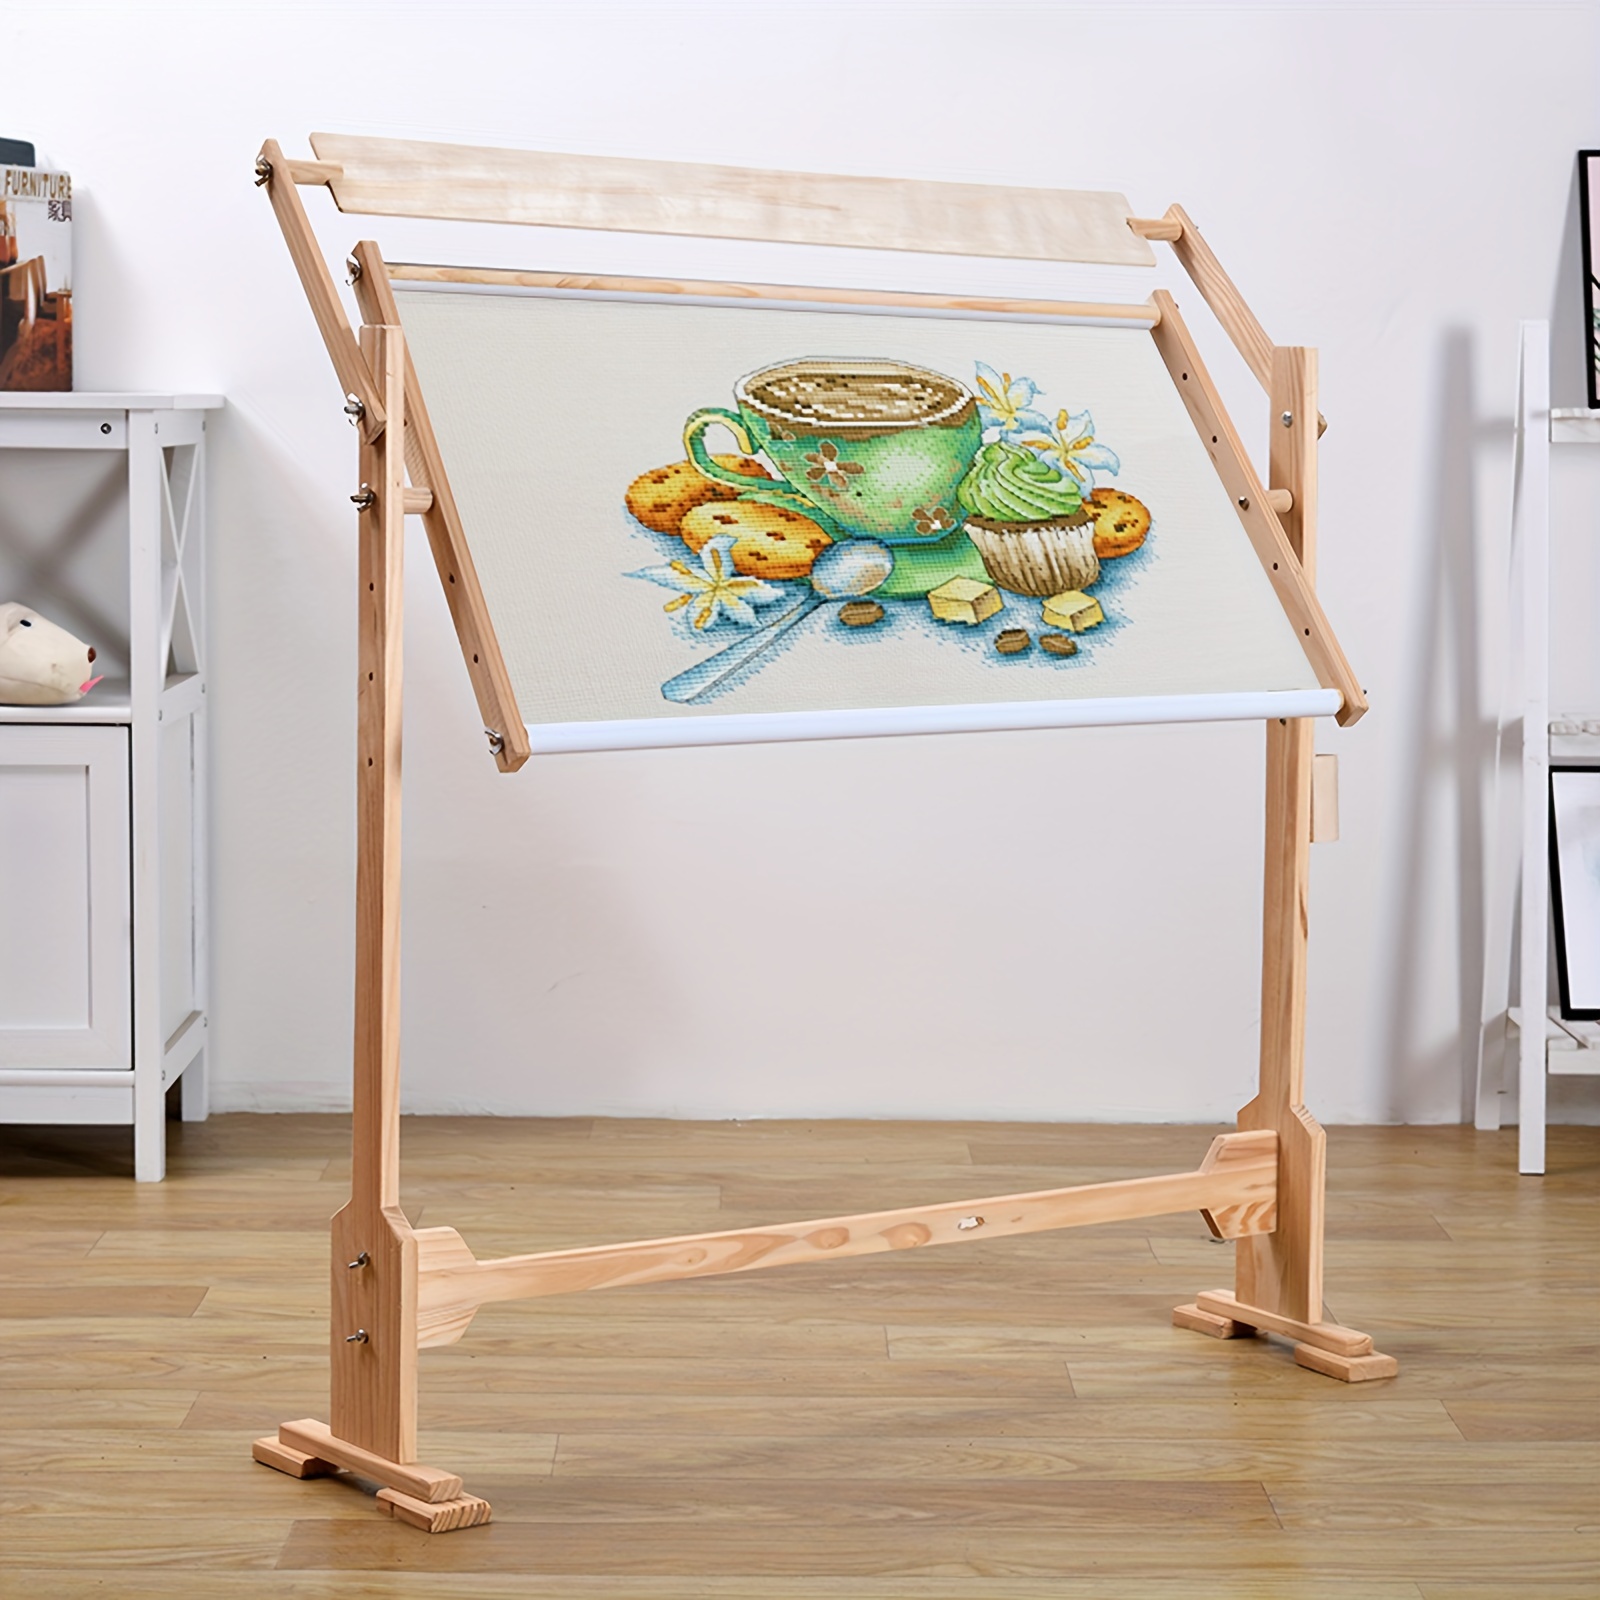 

Needlework Adjustable Embroidery Stand Wooden Frame Cross Stitch Floor Stand